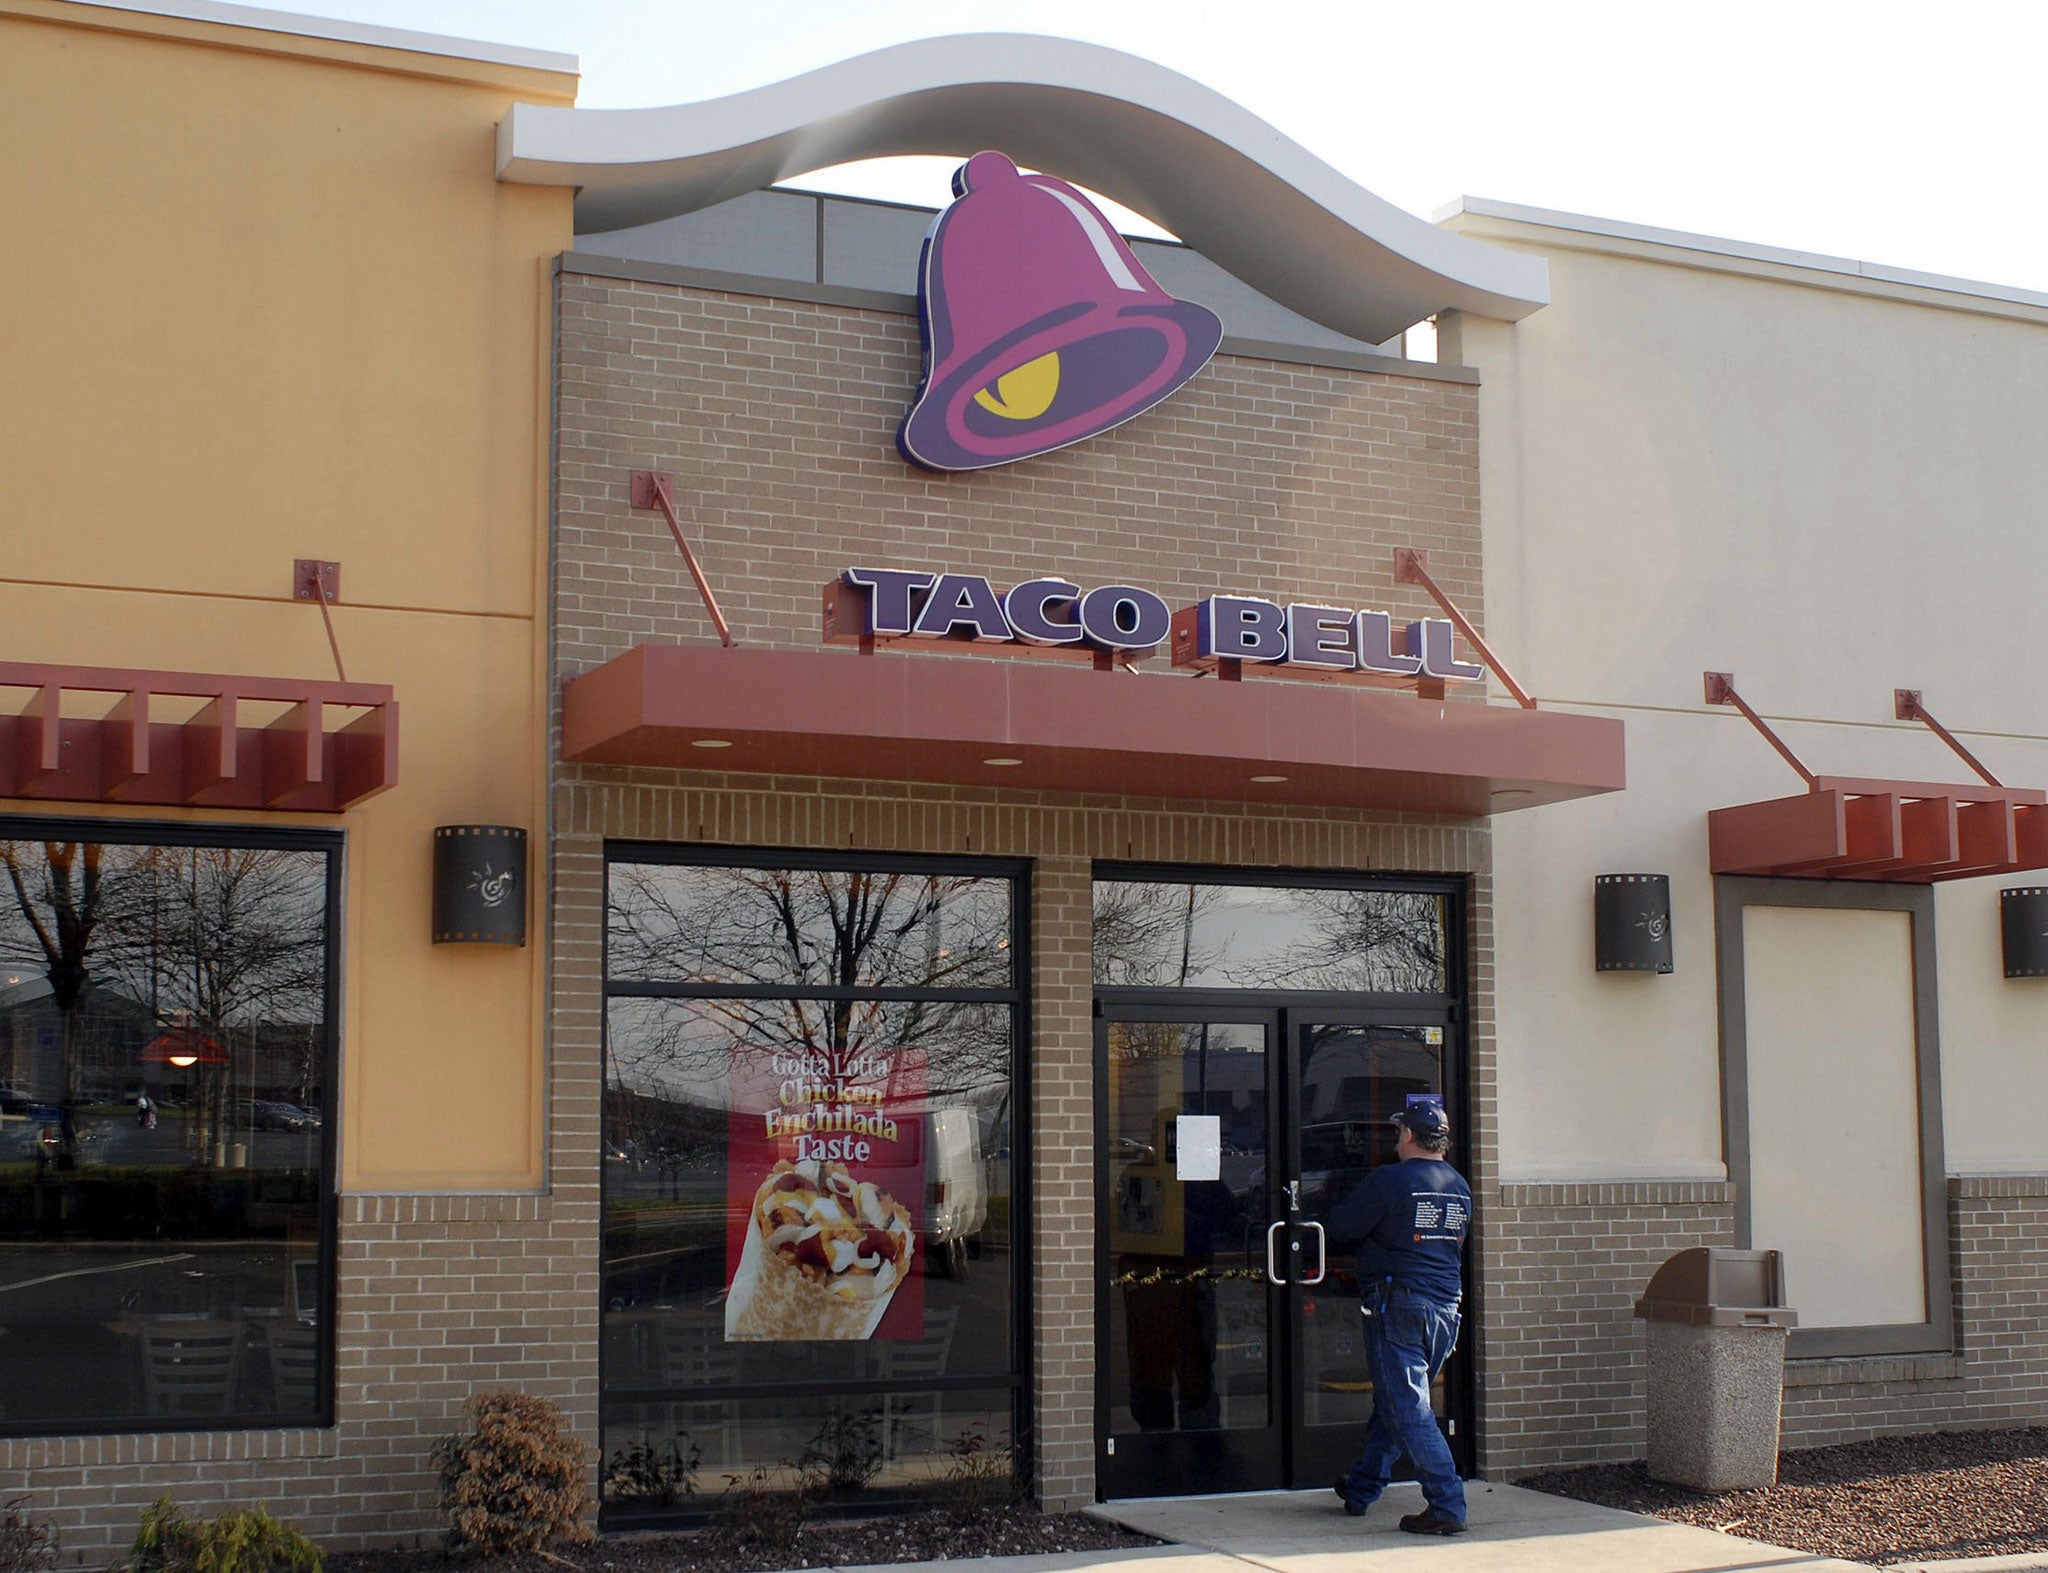 Taco Bell swaps 'meat' for 'protein' as UK stores recover from